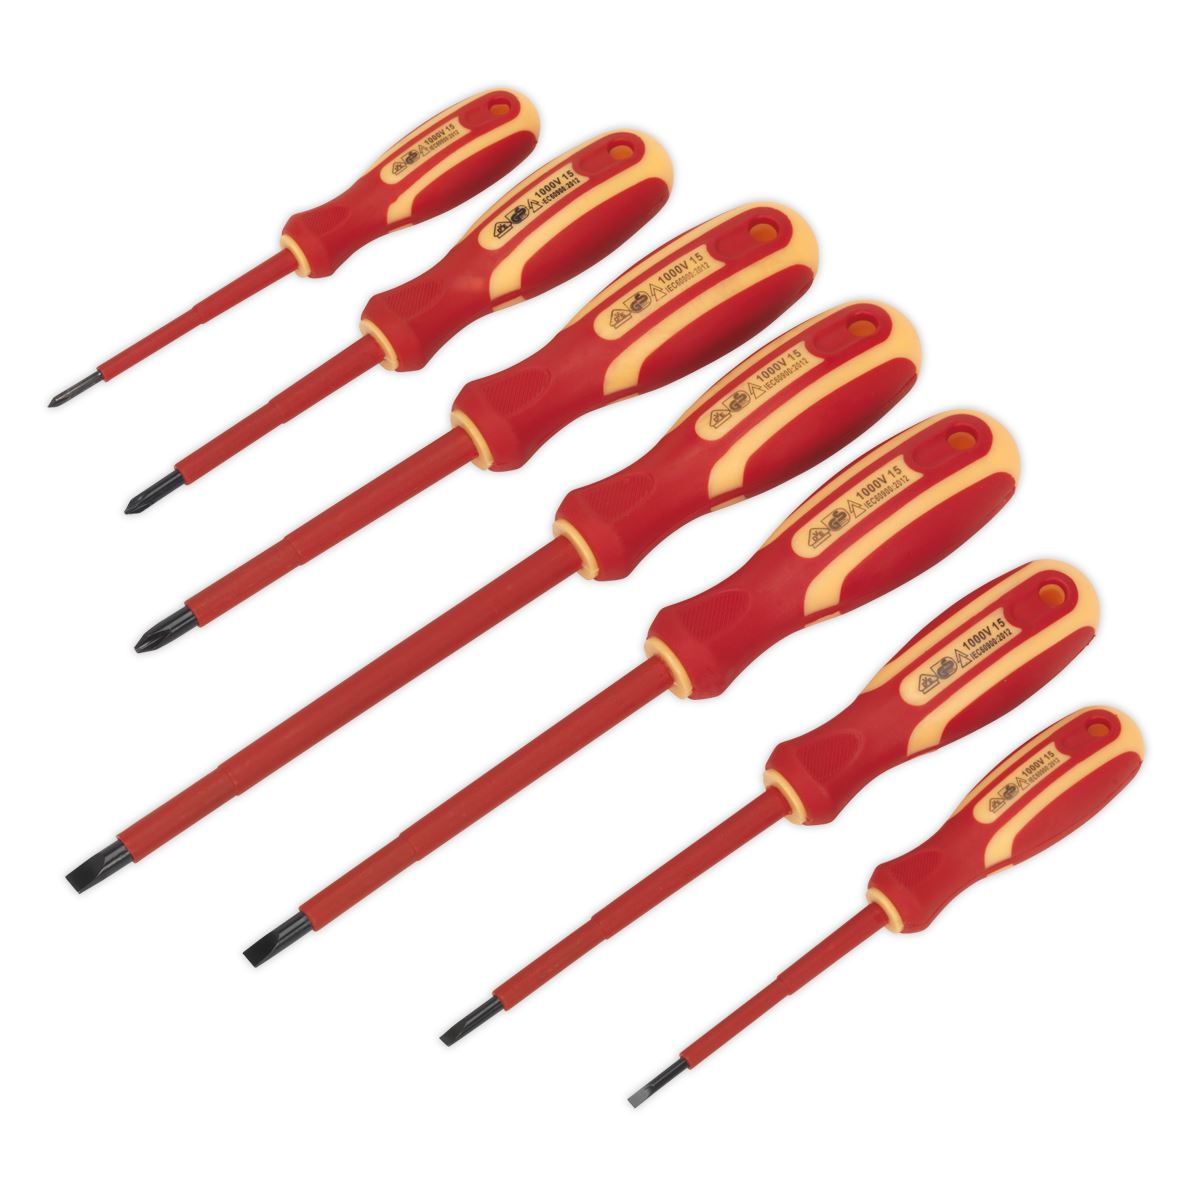 Sealey Screwdriver Set 7pc Electrician's VDE Approved S0756